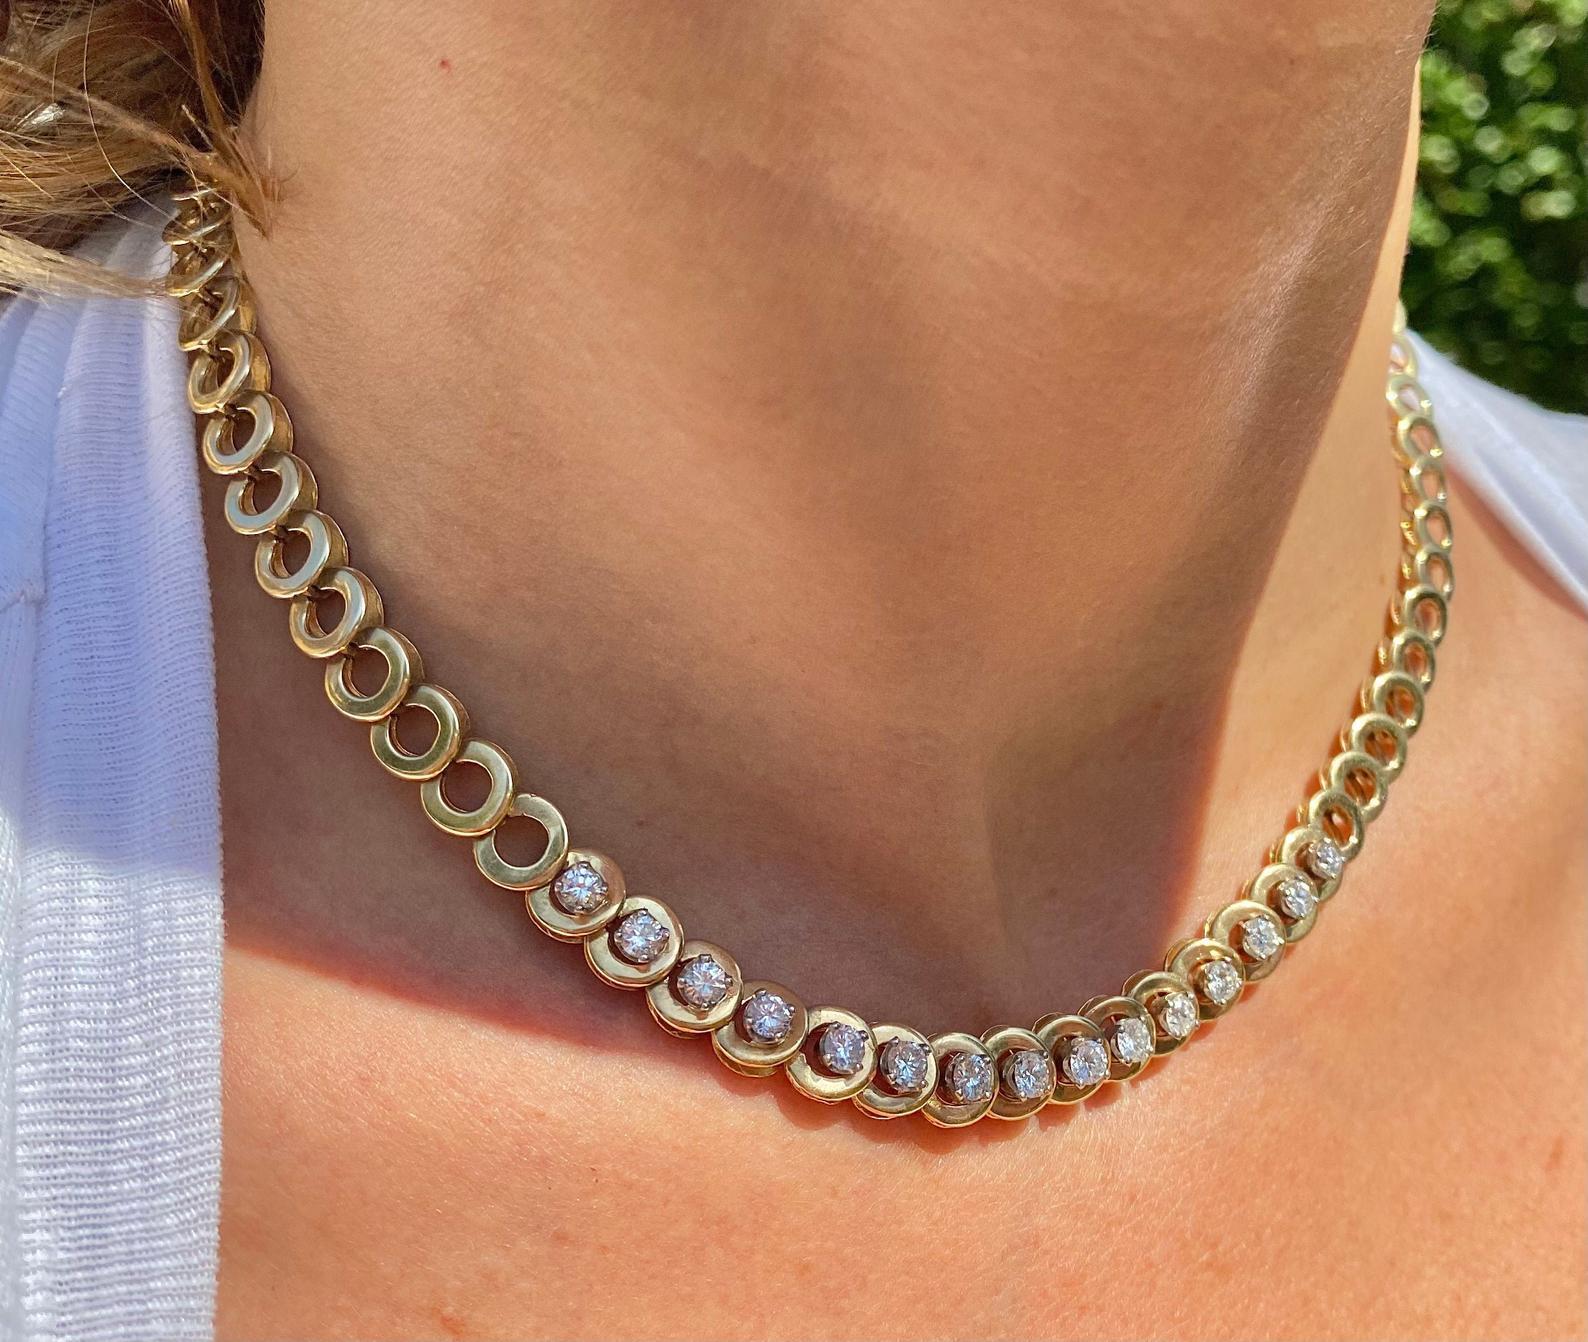 Adorned by approximately ~4.00 Carats of Round-Brilliant Cut Diamonds and set in 33 grams of 14K Yellow Gold. 

Details:
✔ Stone: Diamond
✔ Center-Stone Weight: ~4.00 Carats
✔ Stone Cut: Round-Brilliant
✔ Stone Color: White
✔ Necklace: 14K, ~4.00